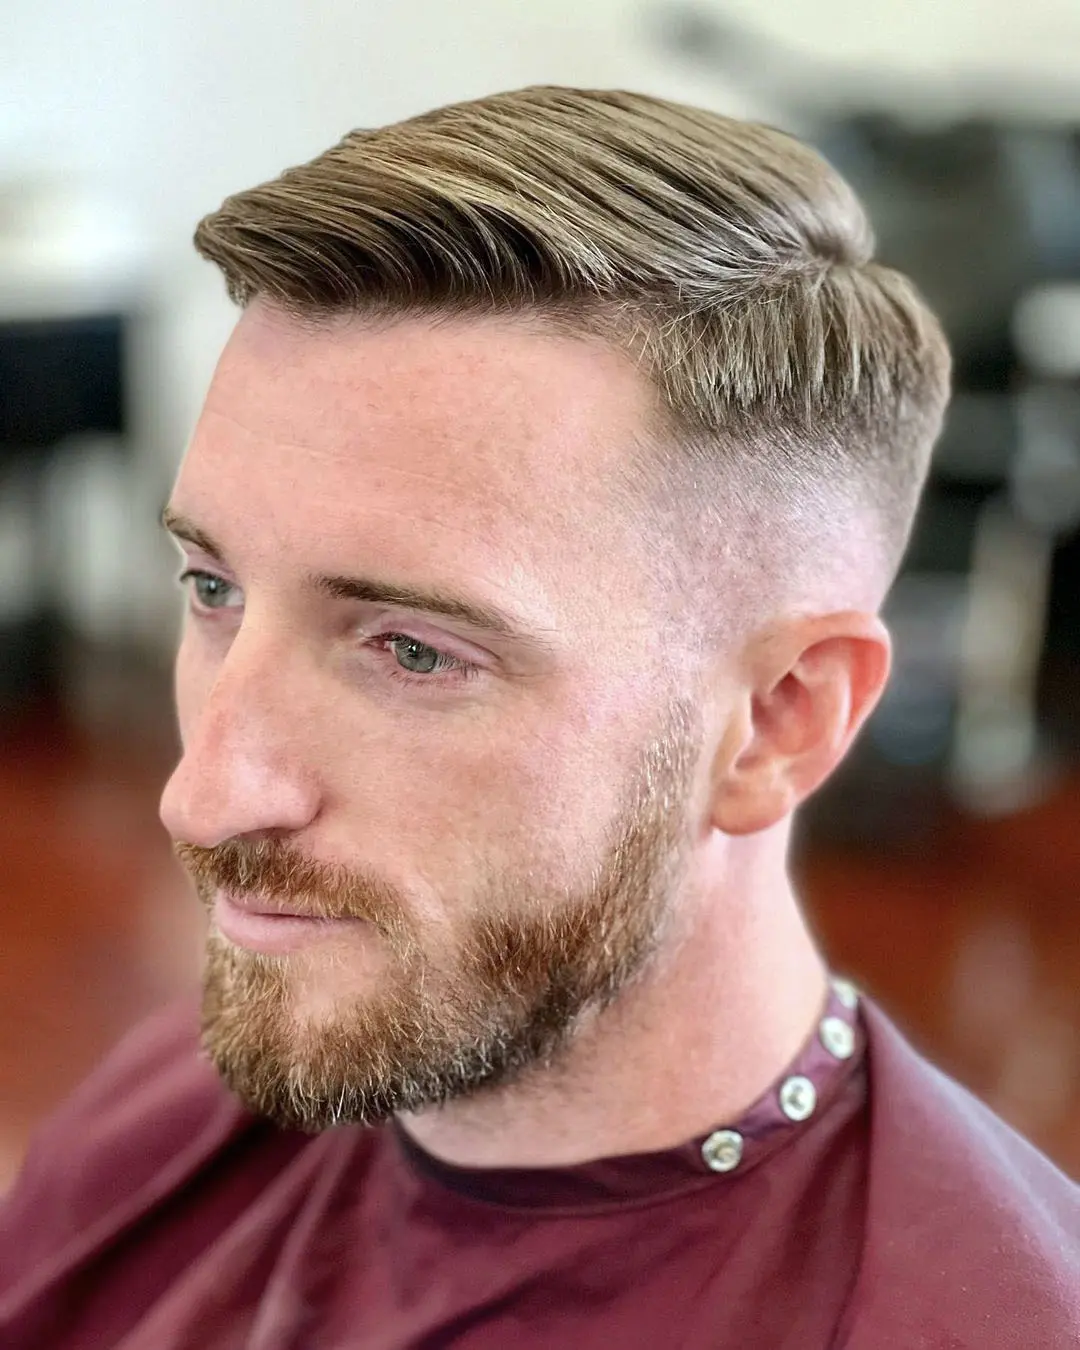 Full picture shows a man rocking the side part